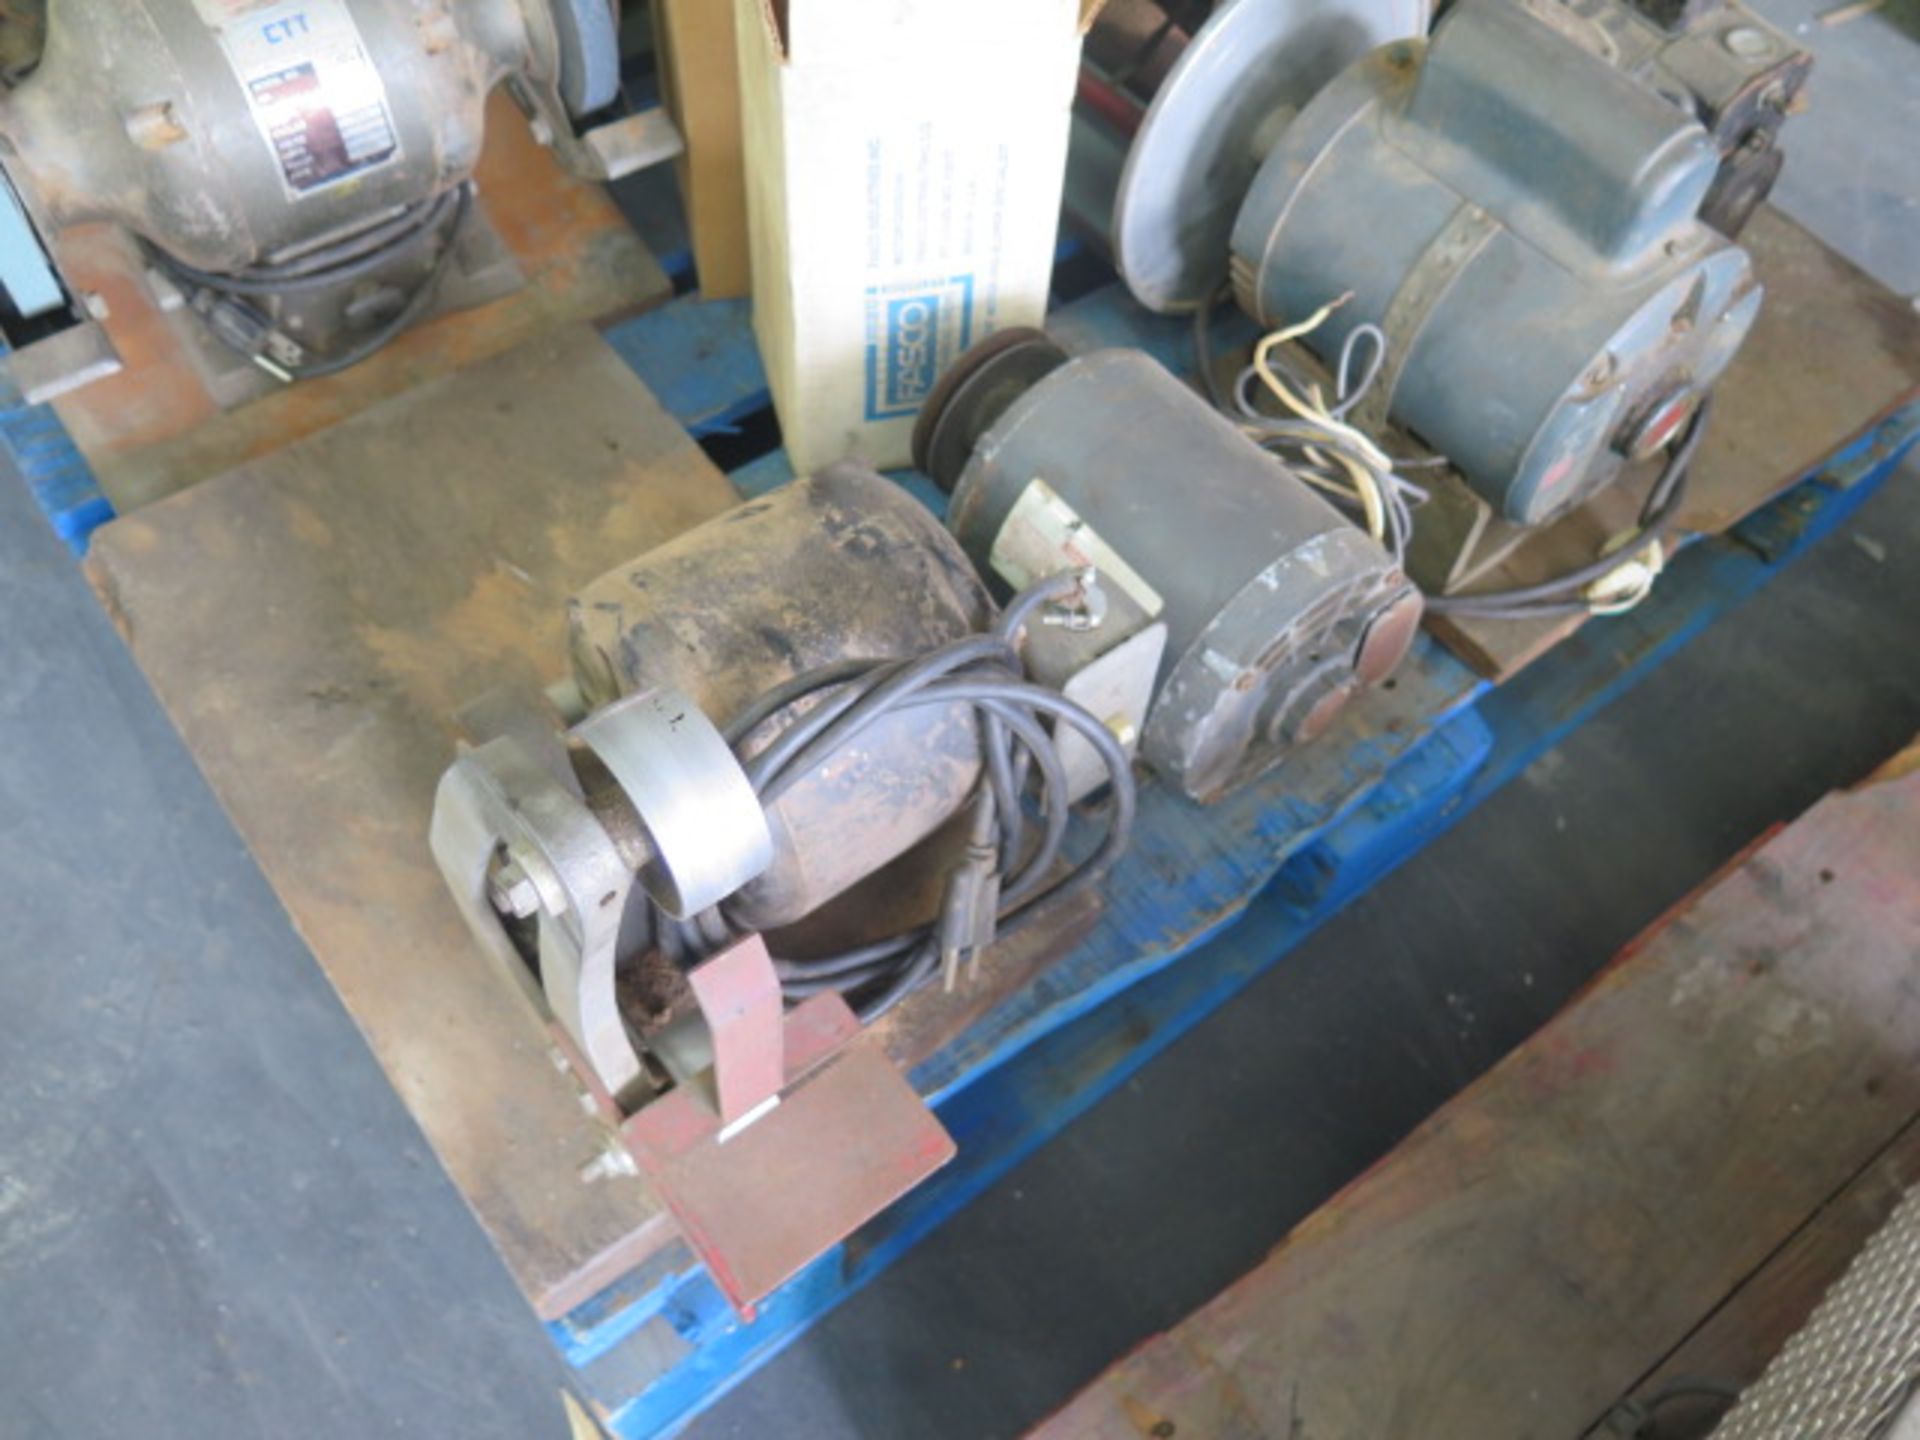 Disc Sanders, Belt Sander, Bench Grinders and Misc (1-Pallet), SOLD AS IS WITH NO WARRANTY - Image 5 of 6